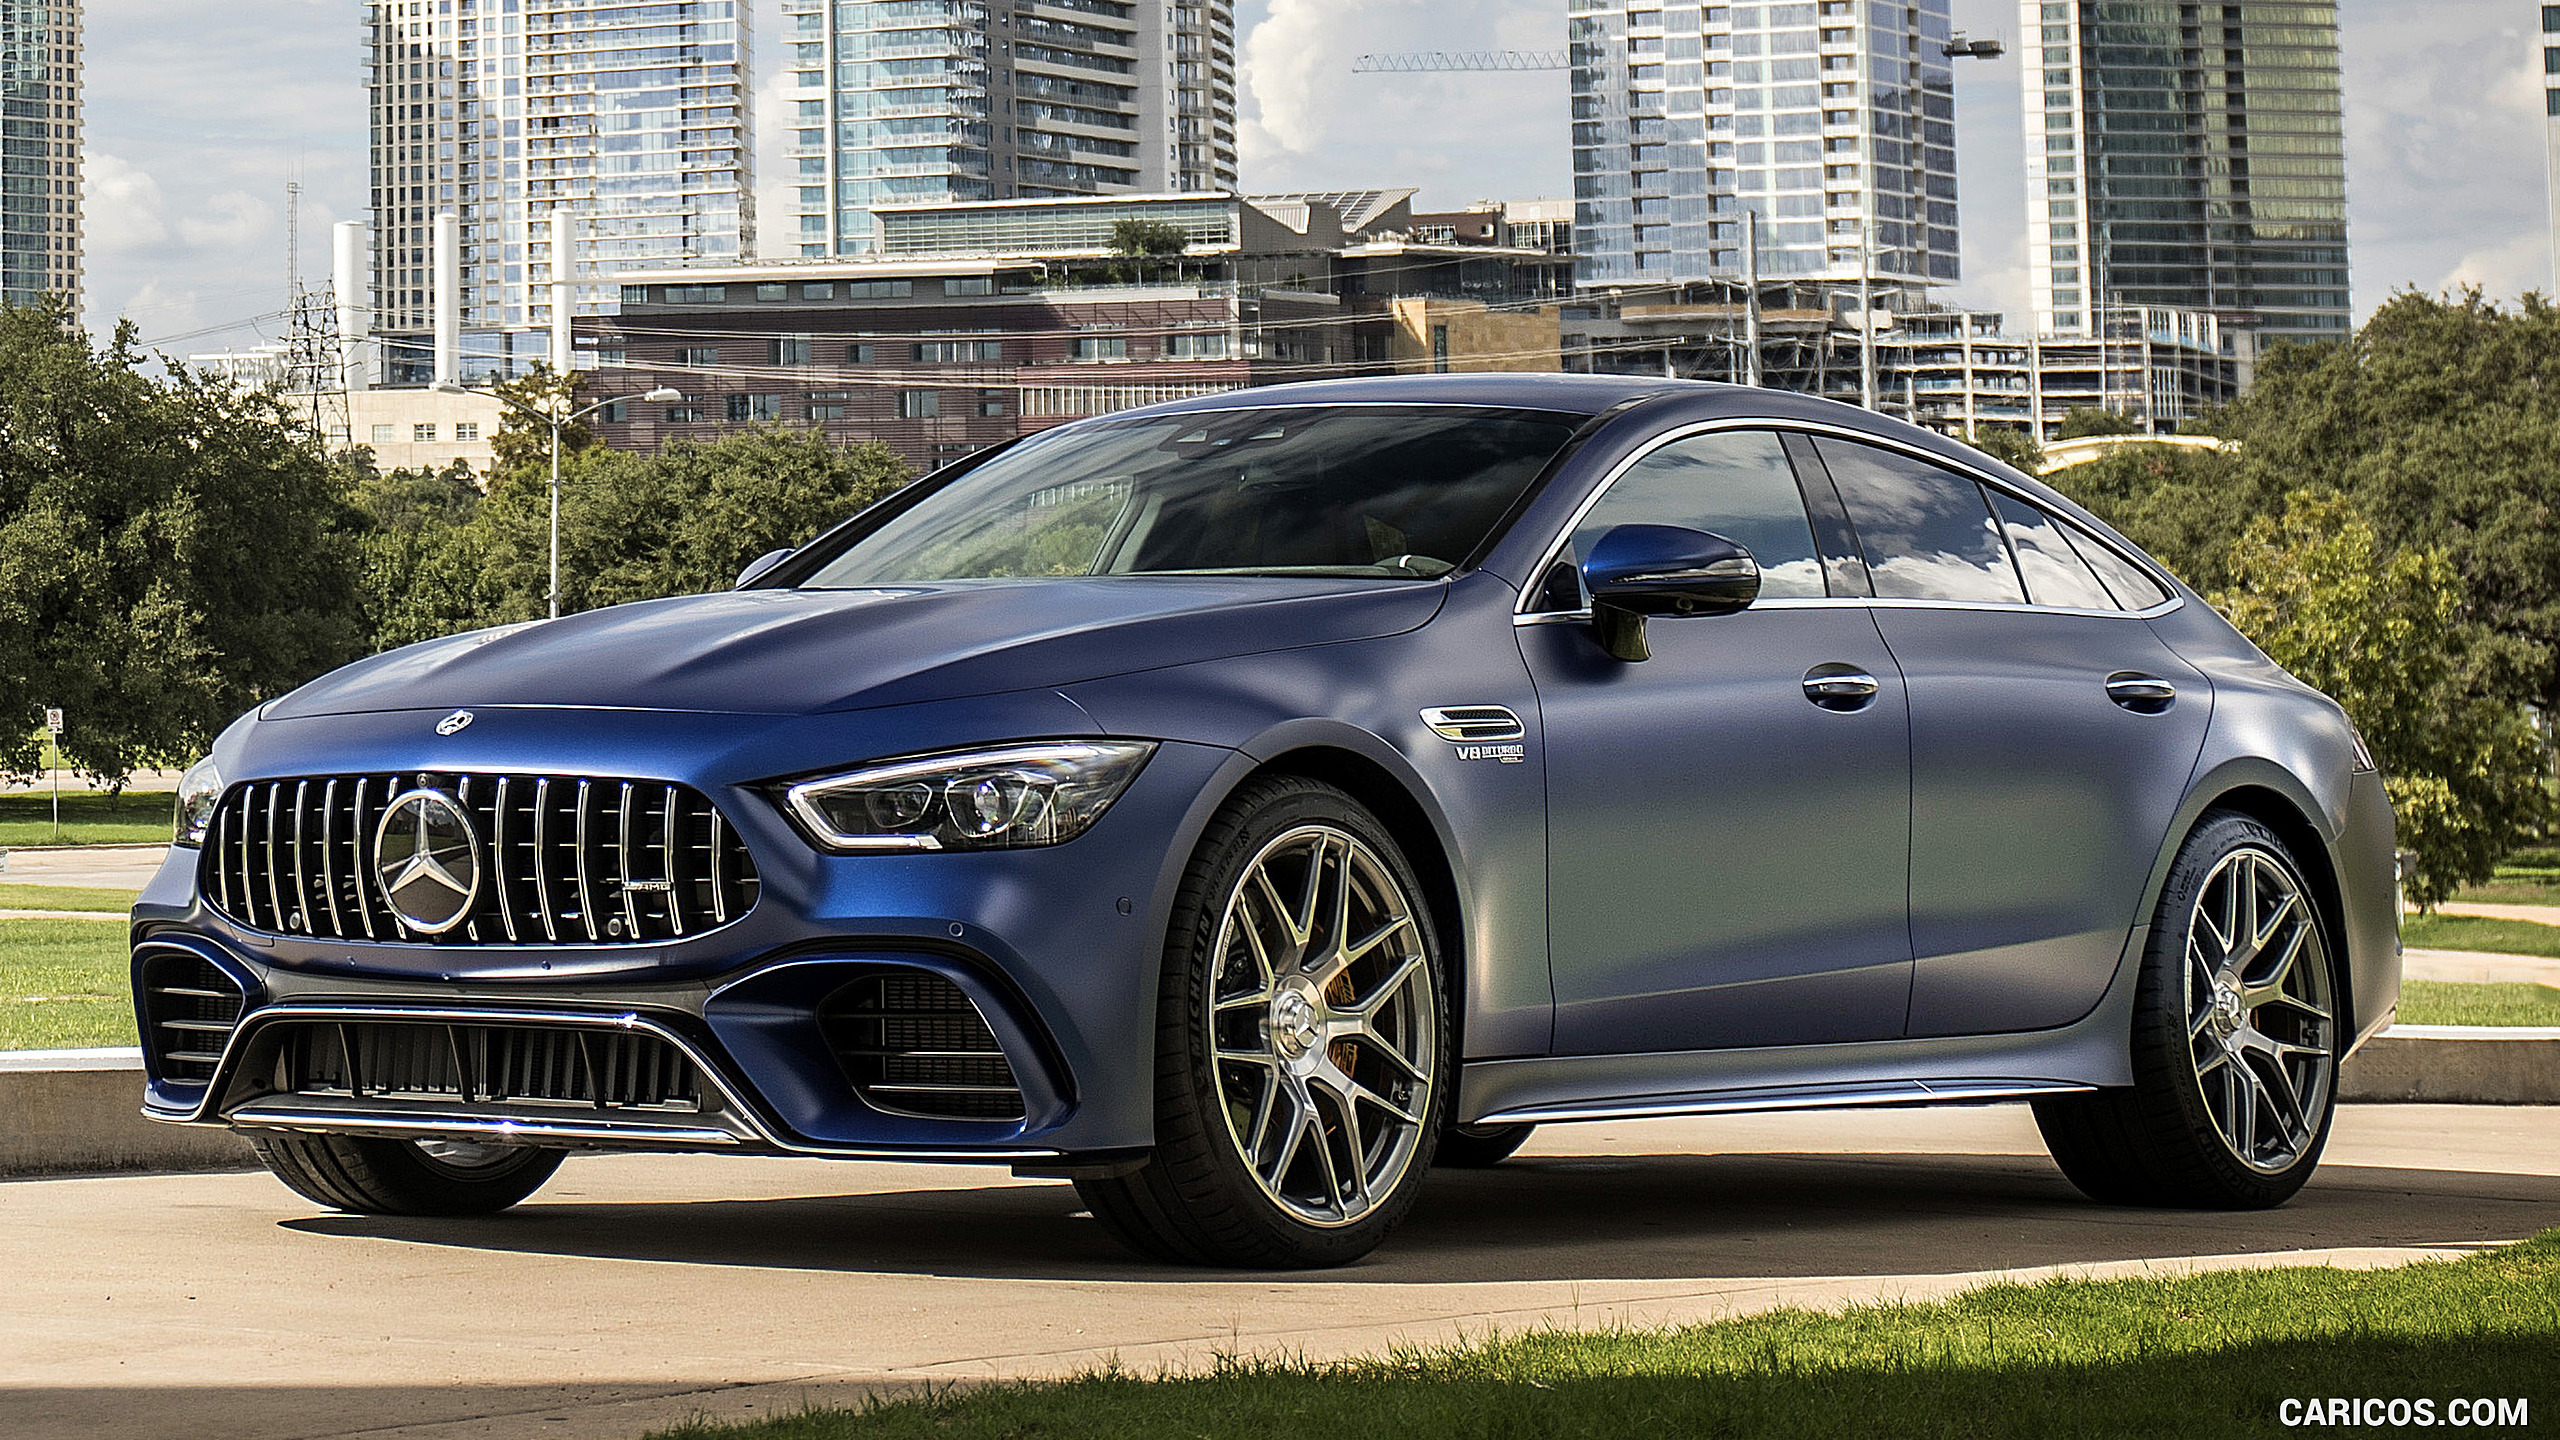 2019 Mercedes-AMG GT 63 S 4MATIC+ 4-Door Coupe - Front Three-Quarter, #121 of 427